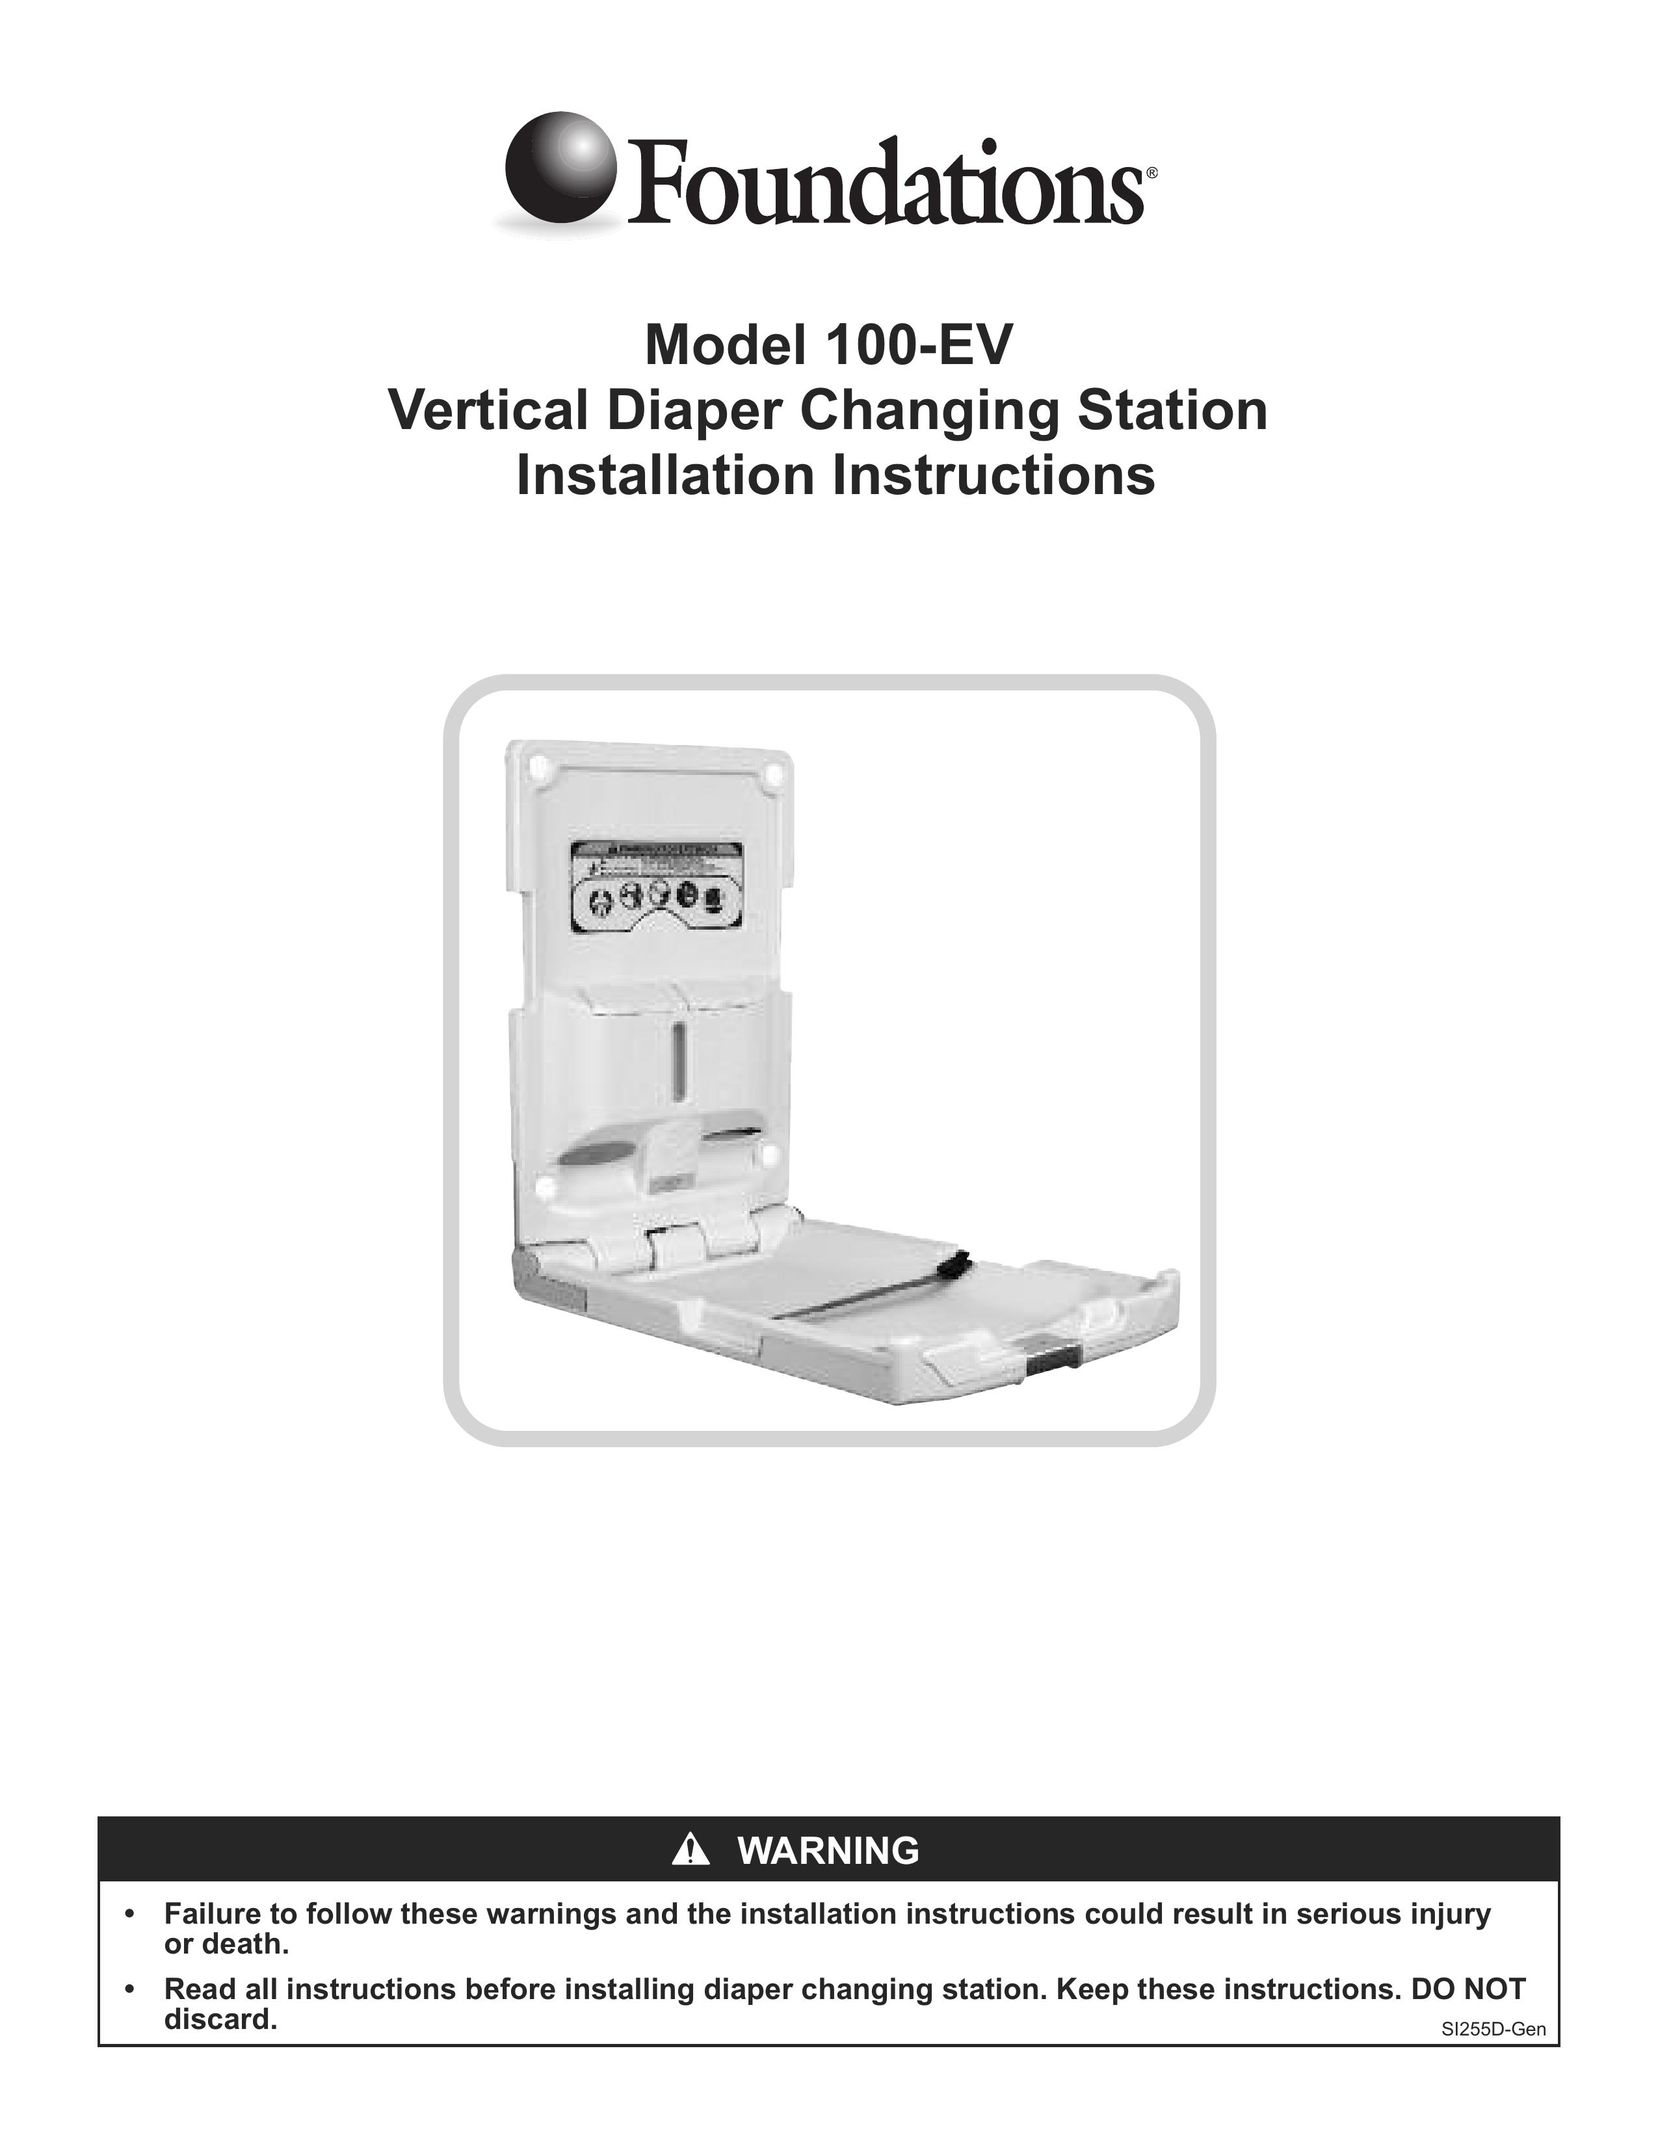 Foundations SI255D-Gen Baby Furniture User Manual (Page 1)